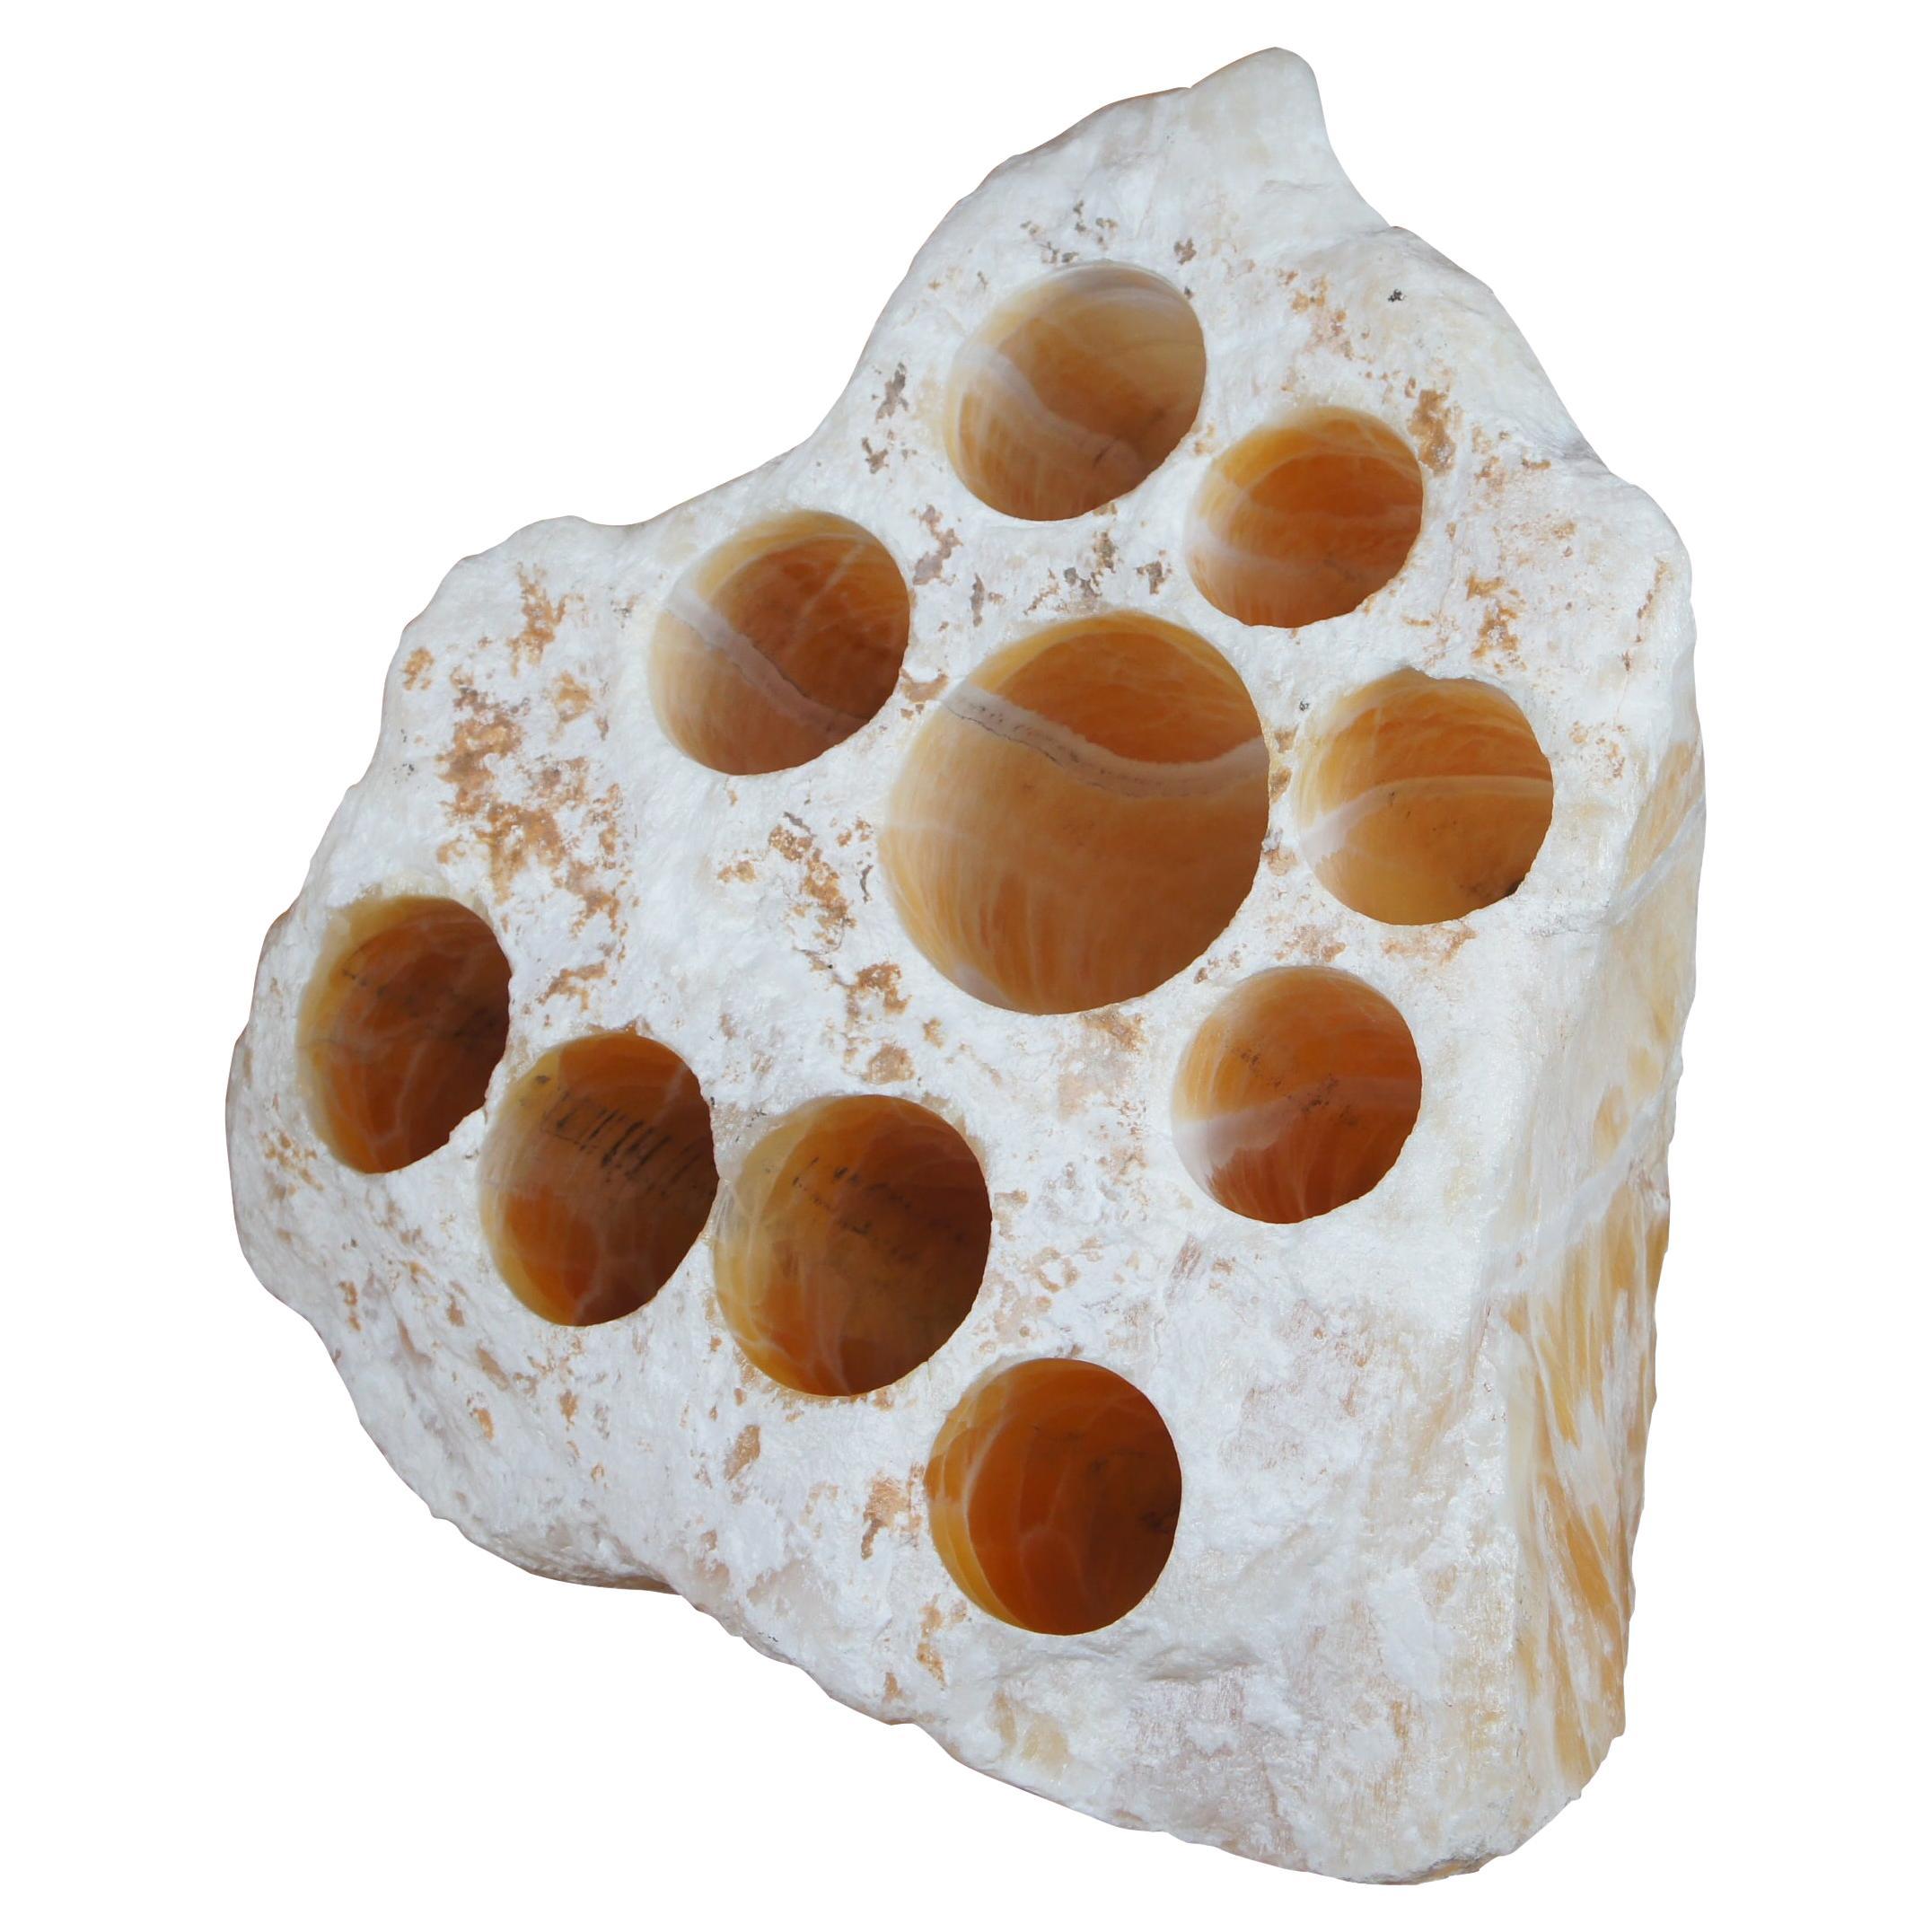 102lb Honeycomb Calcite Amber Onyx Rock Stone Crystal Formation Drilled Holes